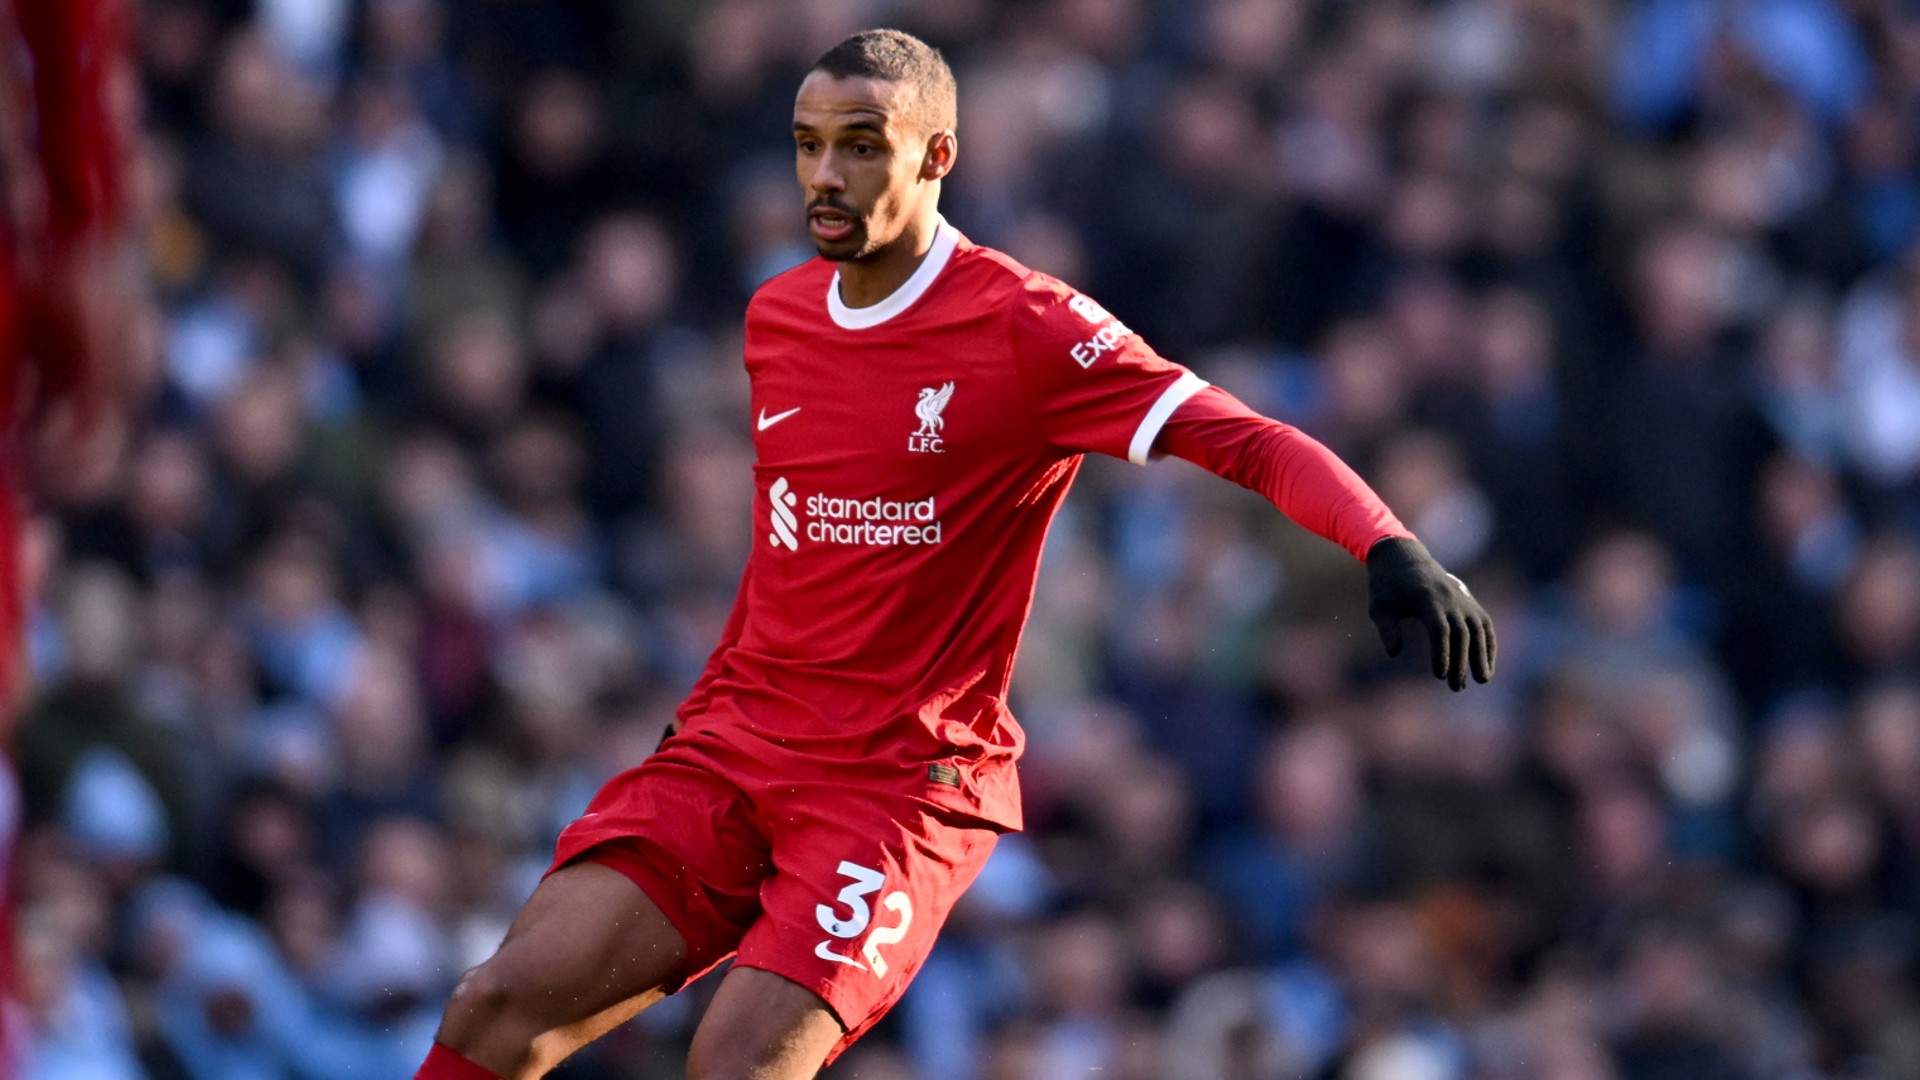 Matip to leave Liverpool